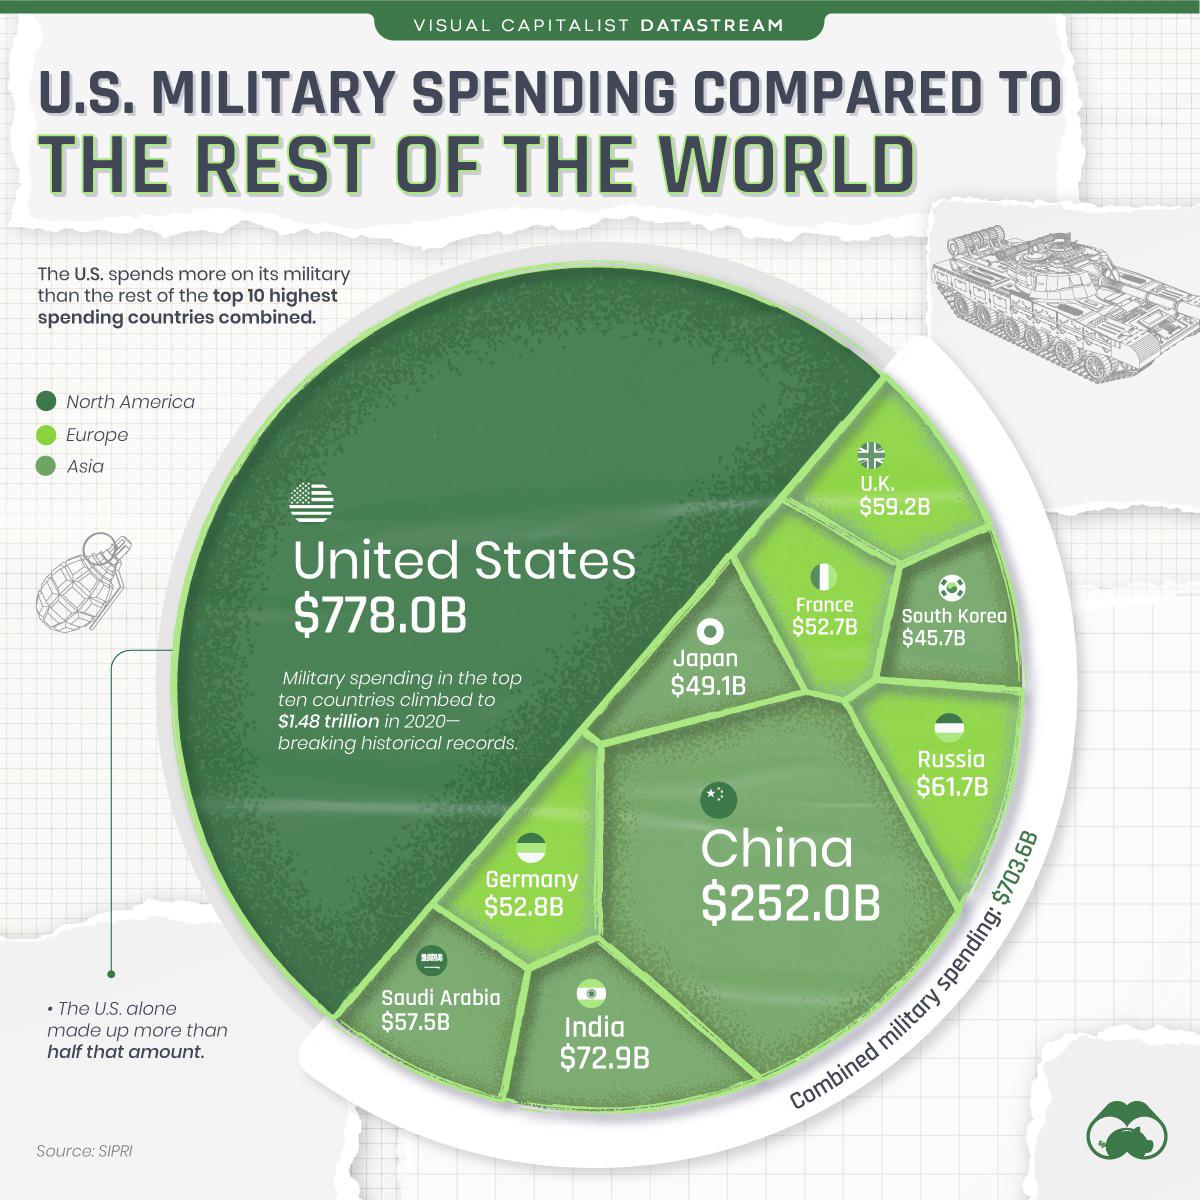 us military spending vs world - Visual Capitalist Datastream U.S. Military Spending Compared To The Rest Of The World The U.S. spends more on its military than the rest of the top 10 highest spending countries combined. North America Europe Asia U.K. $59.